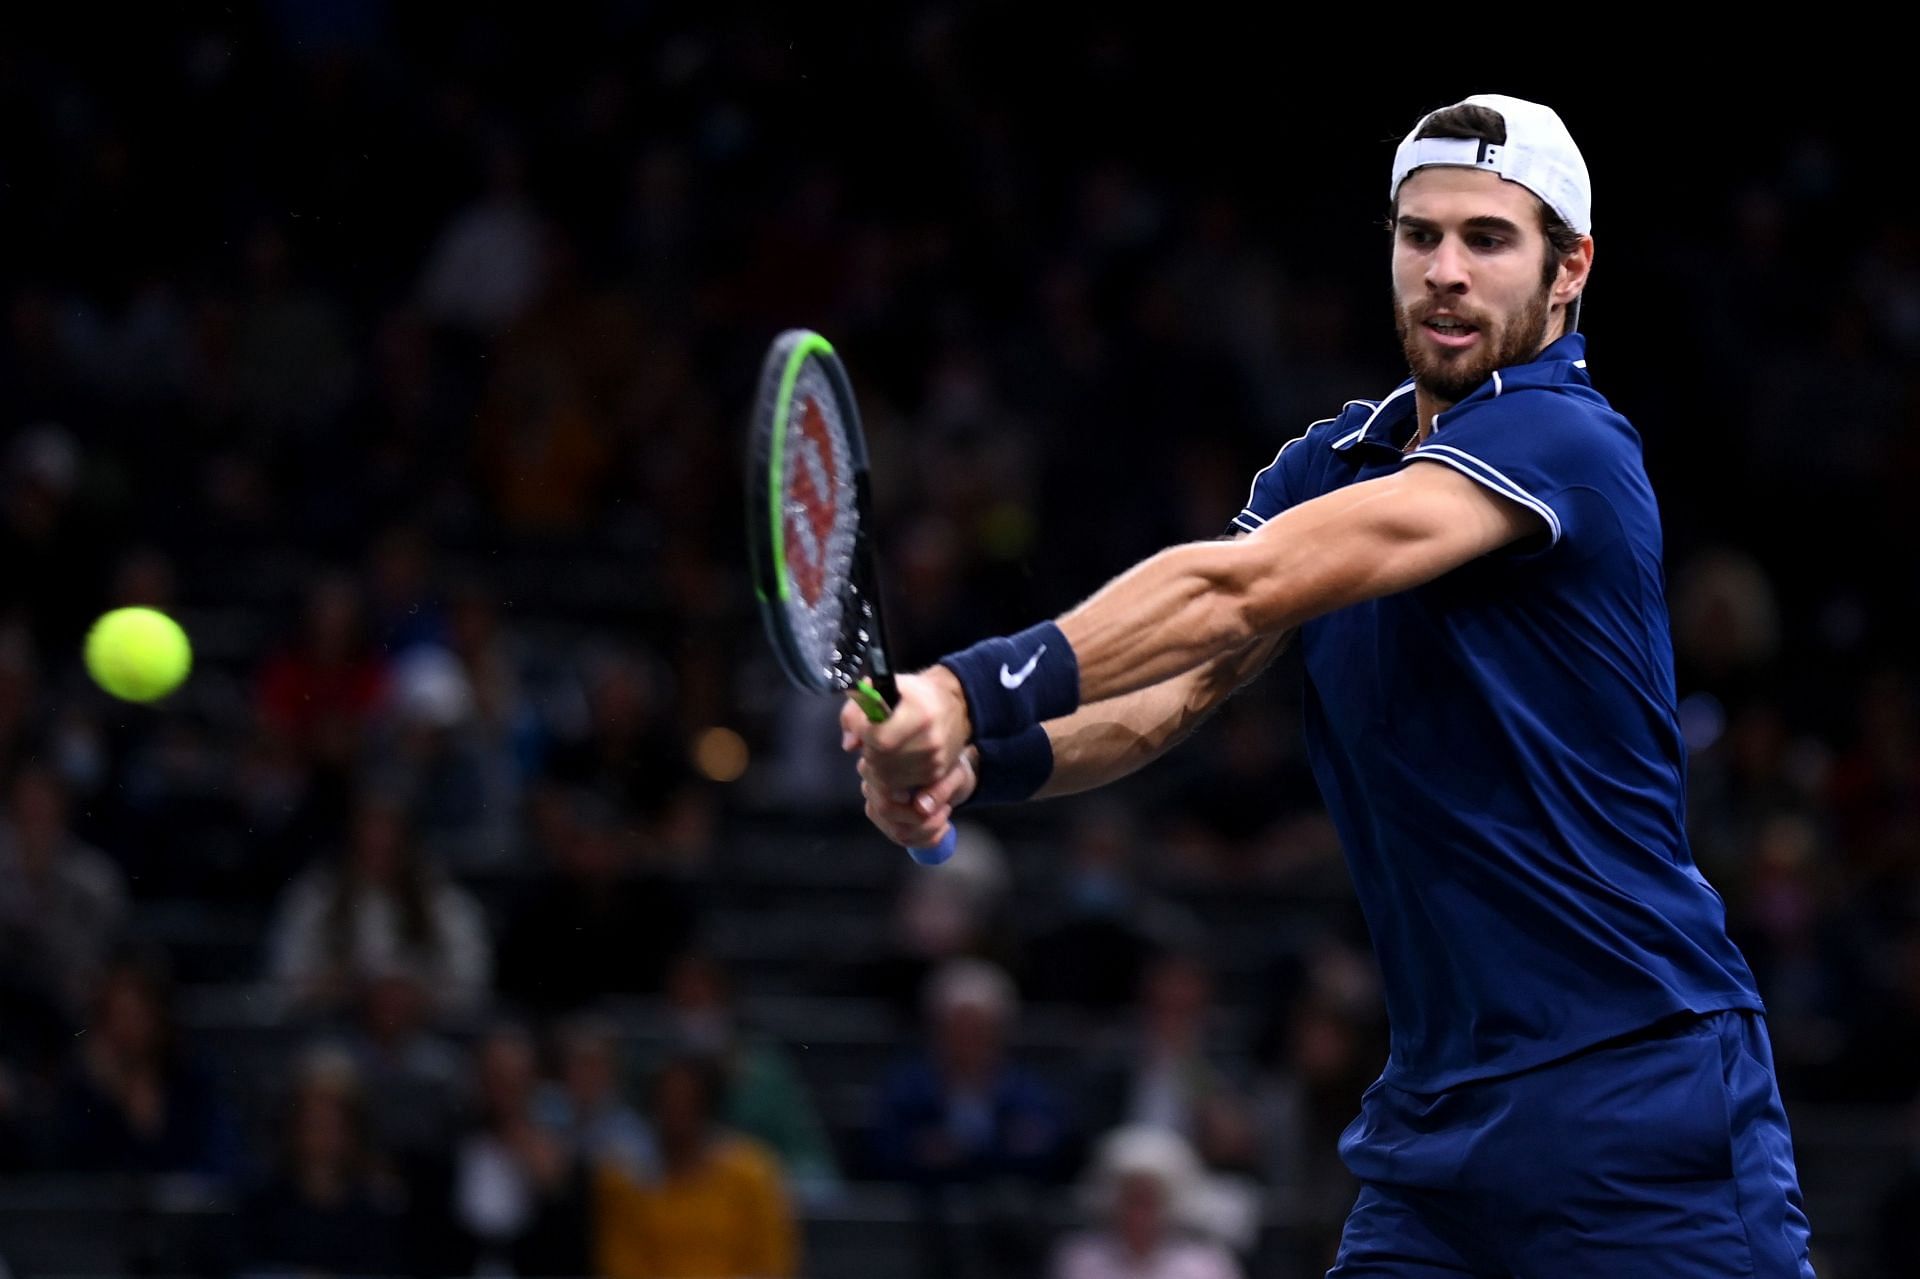 Khachanov will look to match his best showing in Miami by reaching the third round.